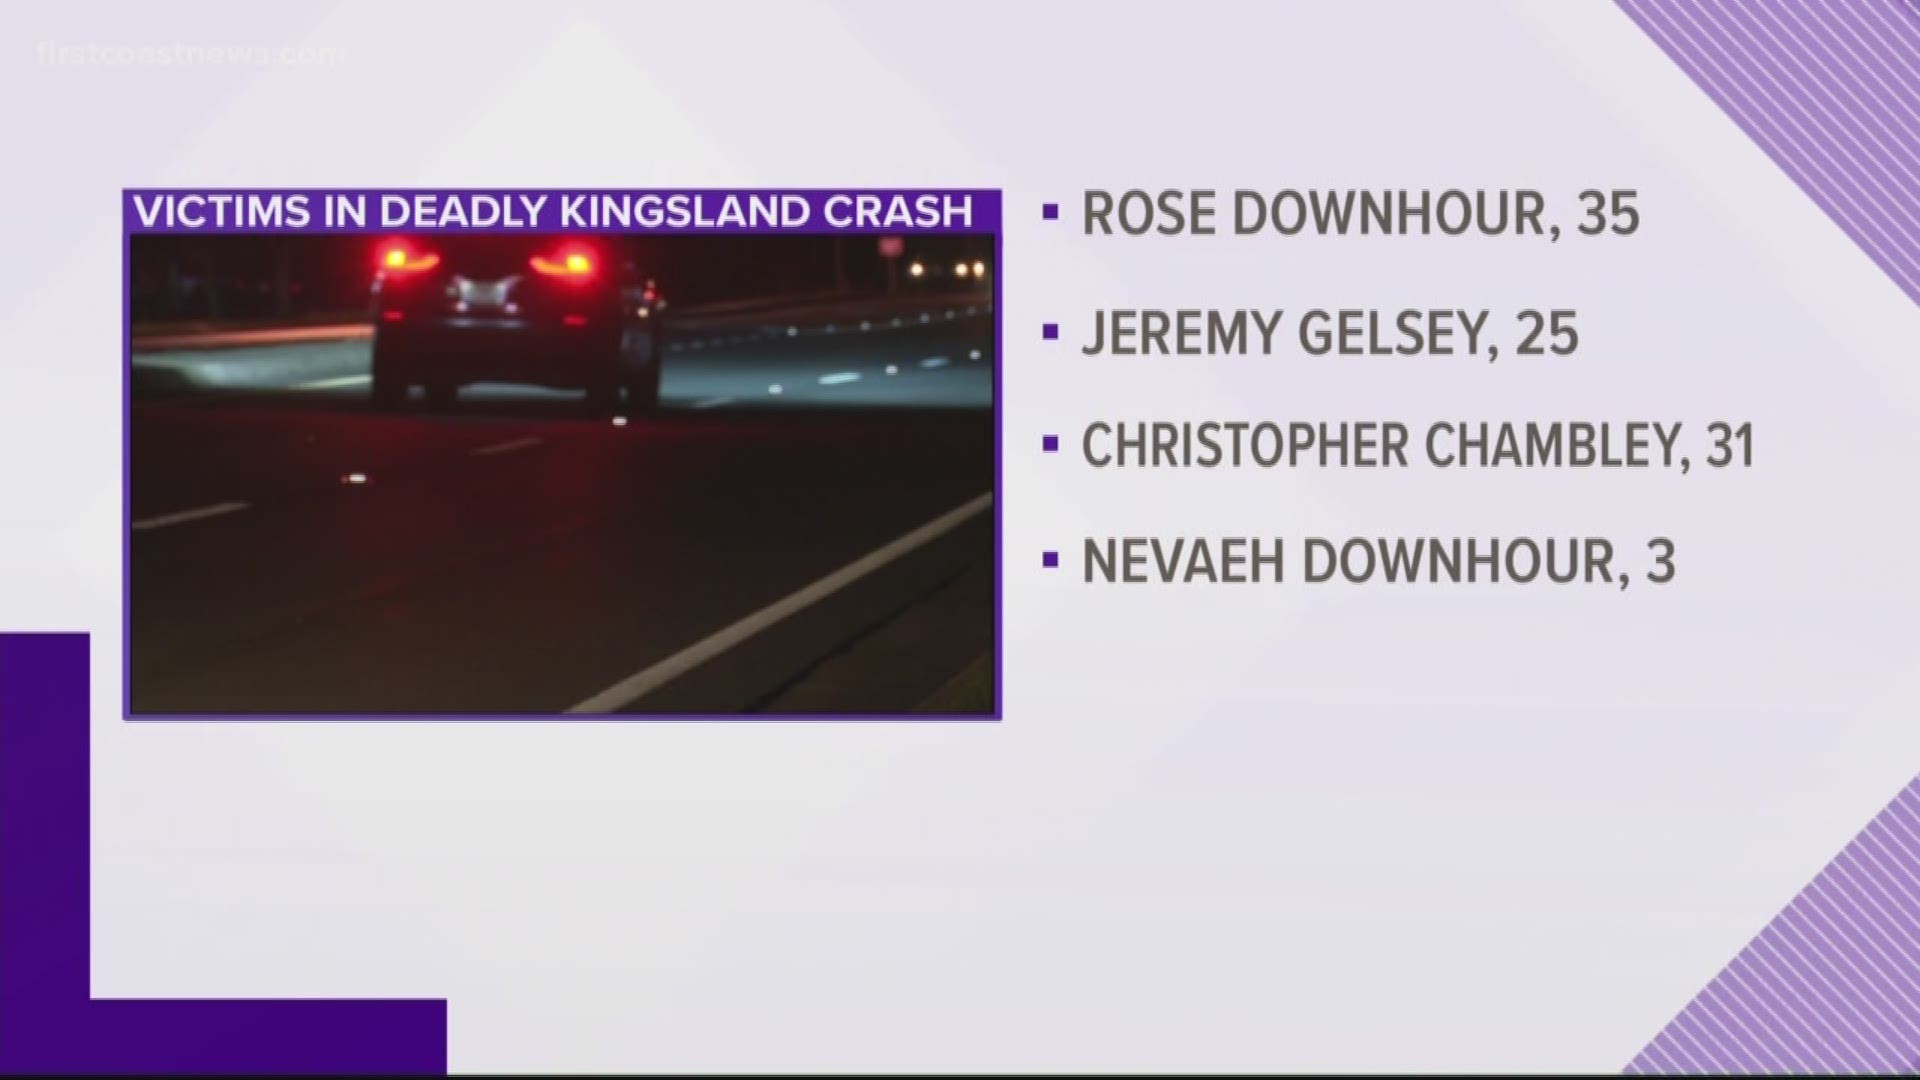 Georgia police have identified a 3-year-old girl and three adults killed in a head-on crash on Highway 40 in Georgia near Kingsland.